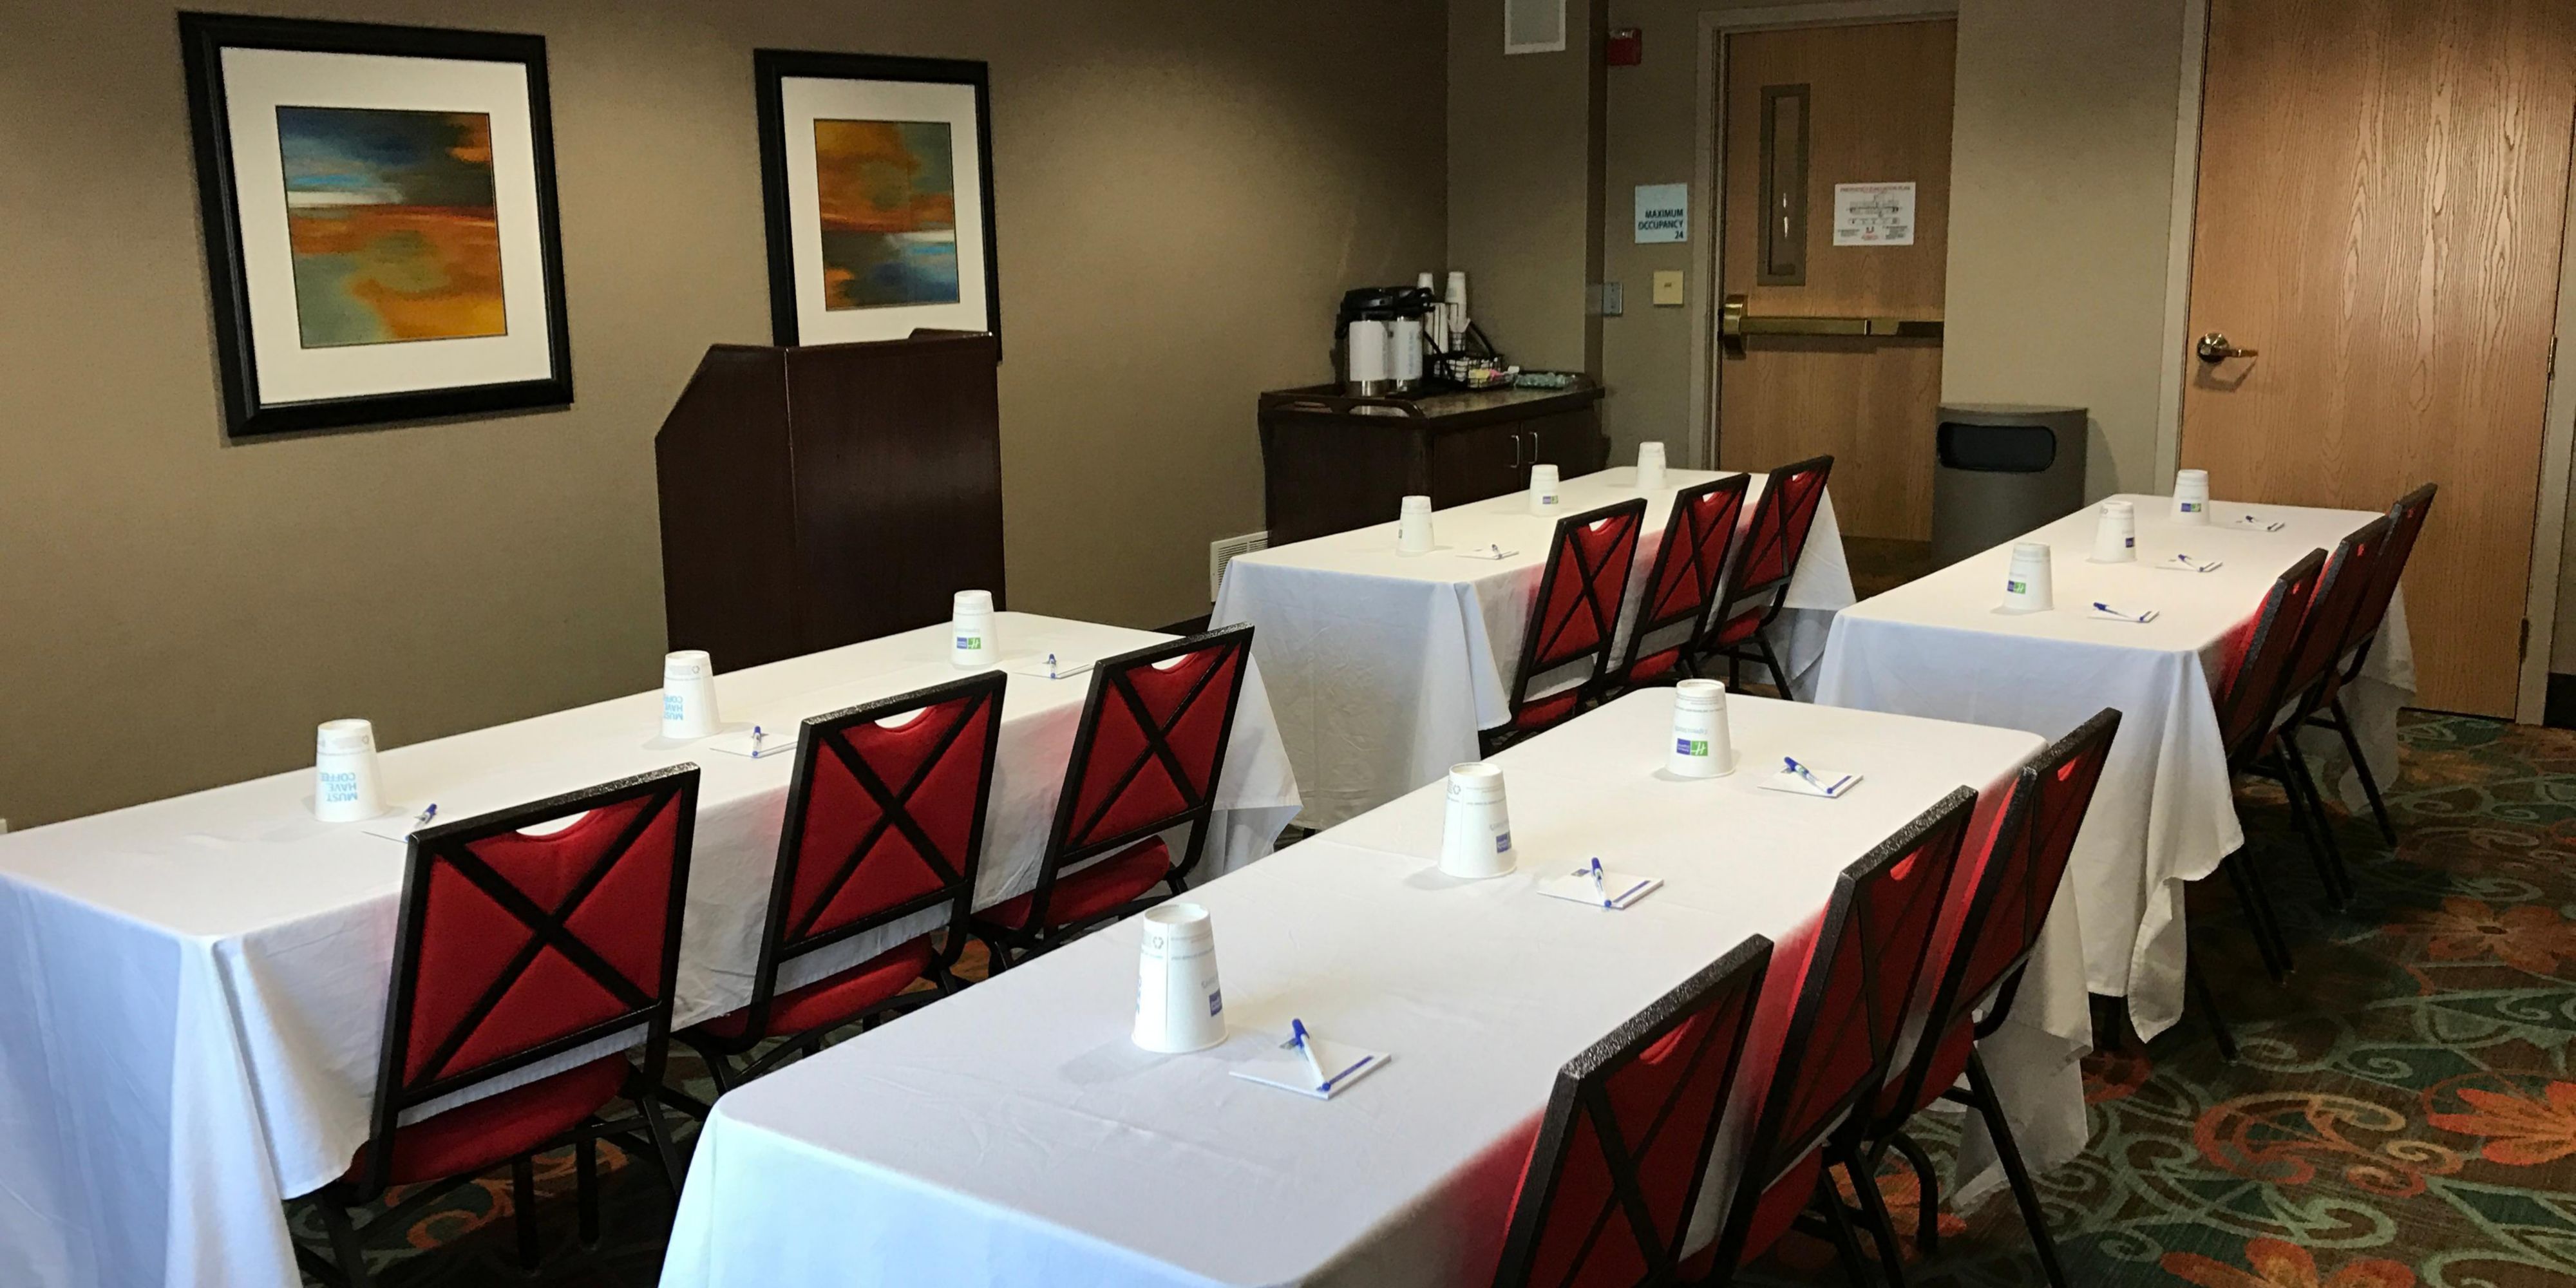 From trainings to interviews, our meeting space can accommodate up to 24 people.